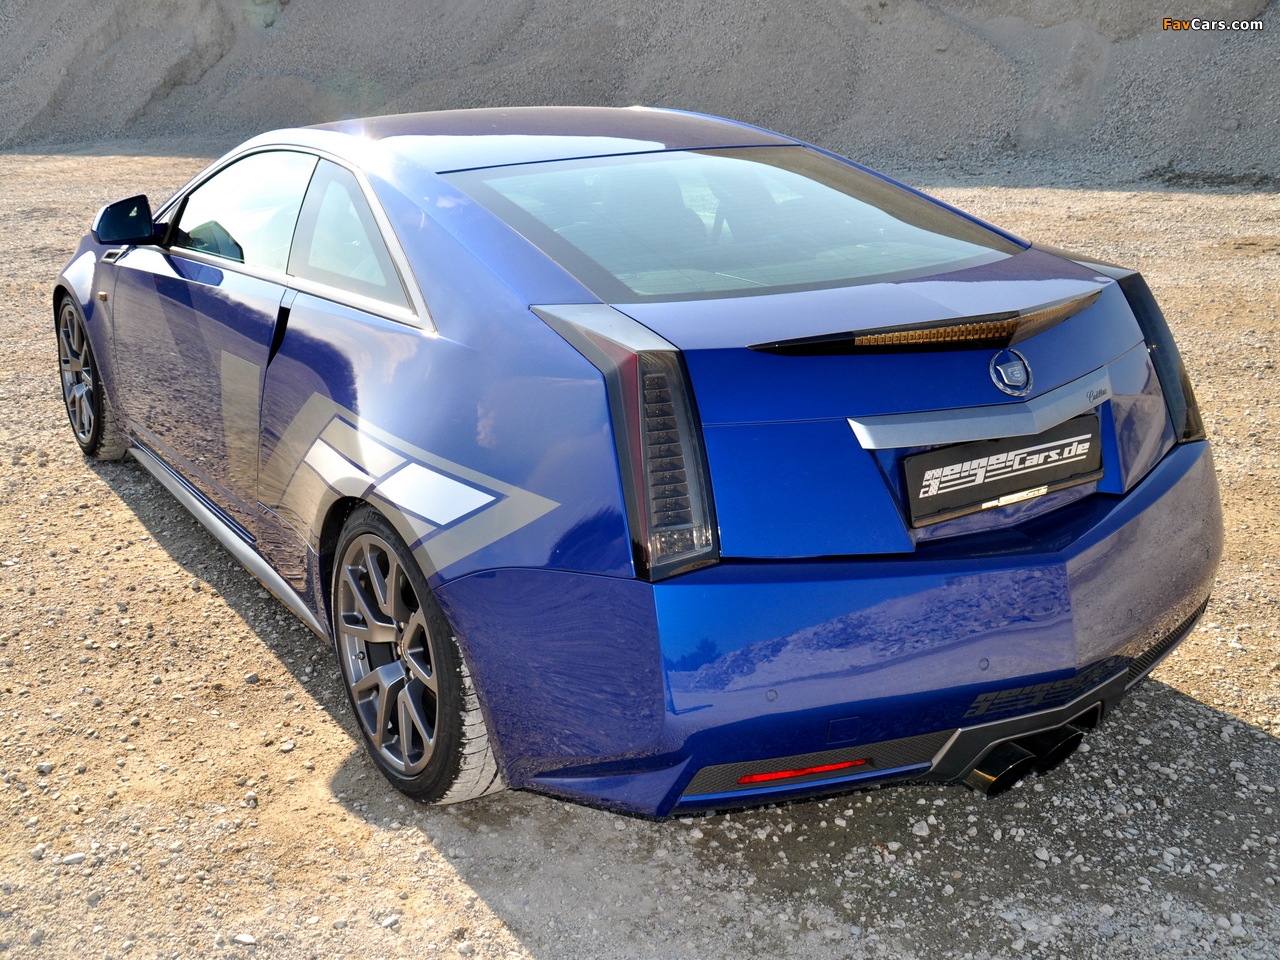 Geiger Cadillac CTS-V Coupe Blue Brute 2011 pictures (1280 x 960)